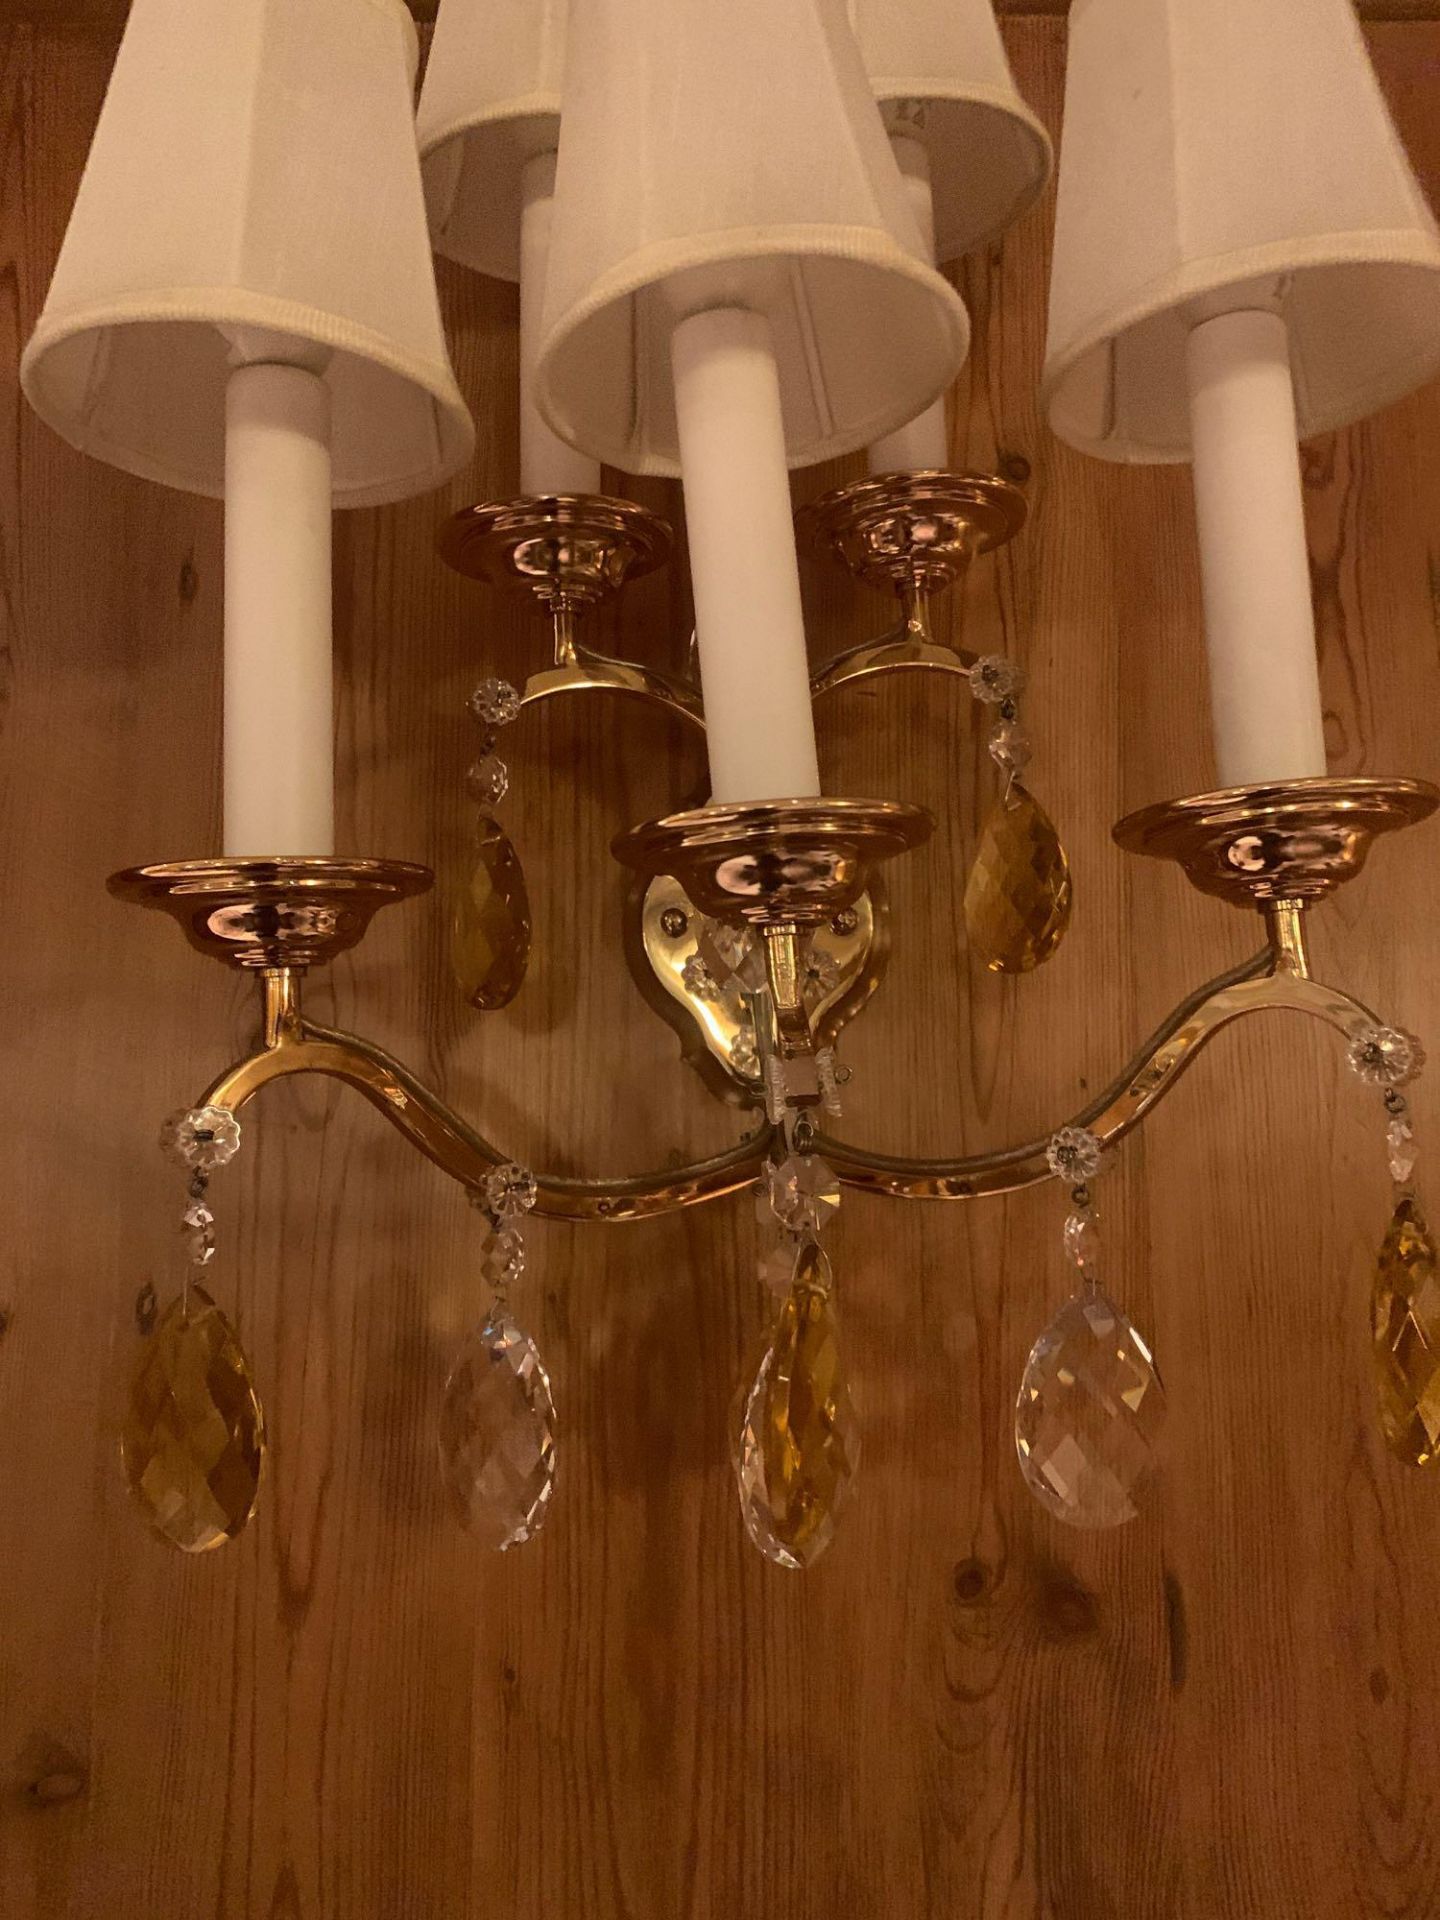 A Pair Of Five Arm Brass Wall Sconce With Linen Shades Droplets Amber And Clear Crystal Glass. 35x - Image 3 of 4